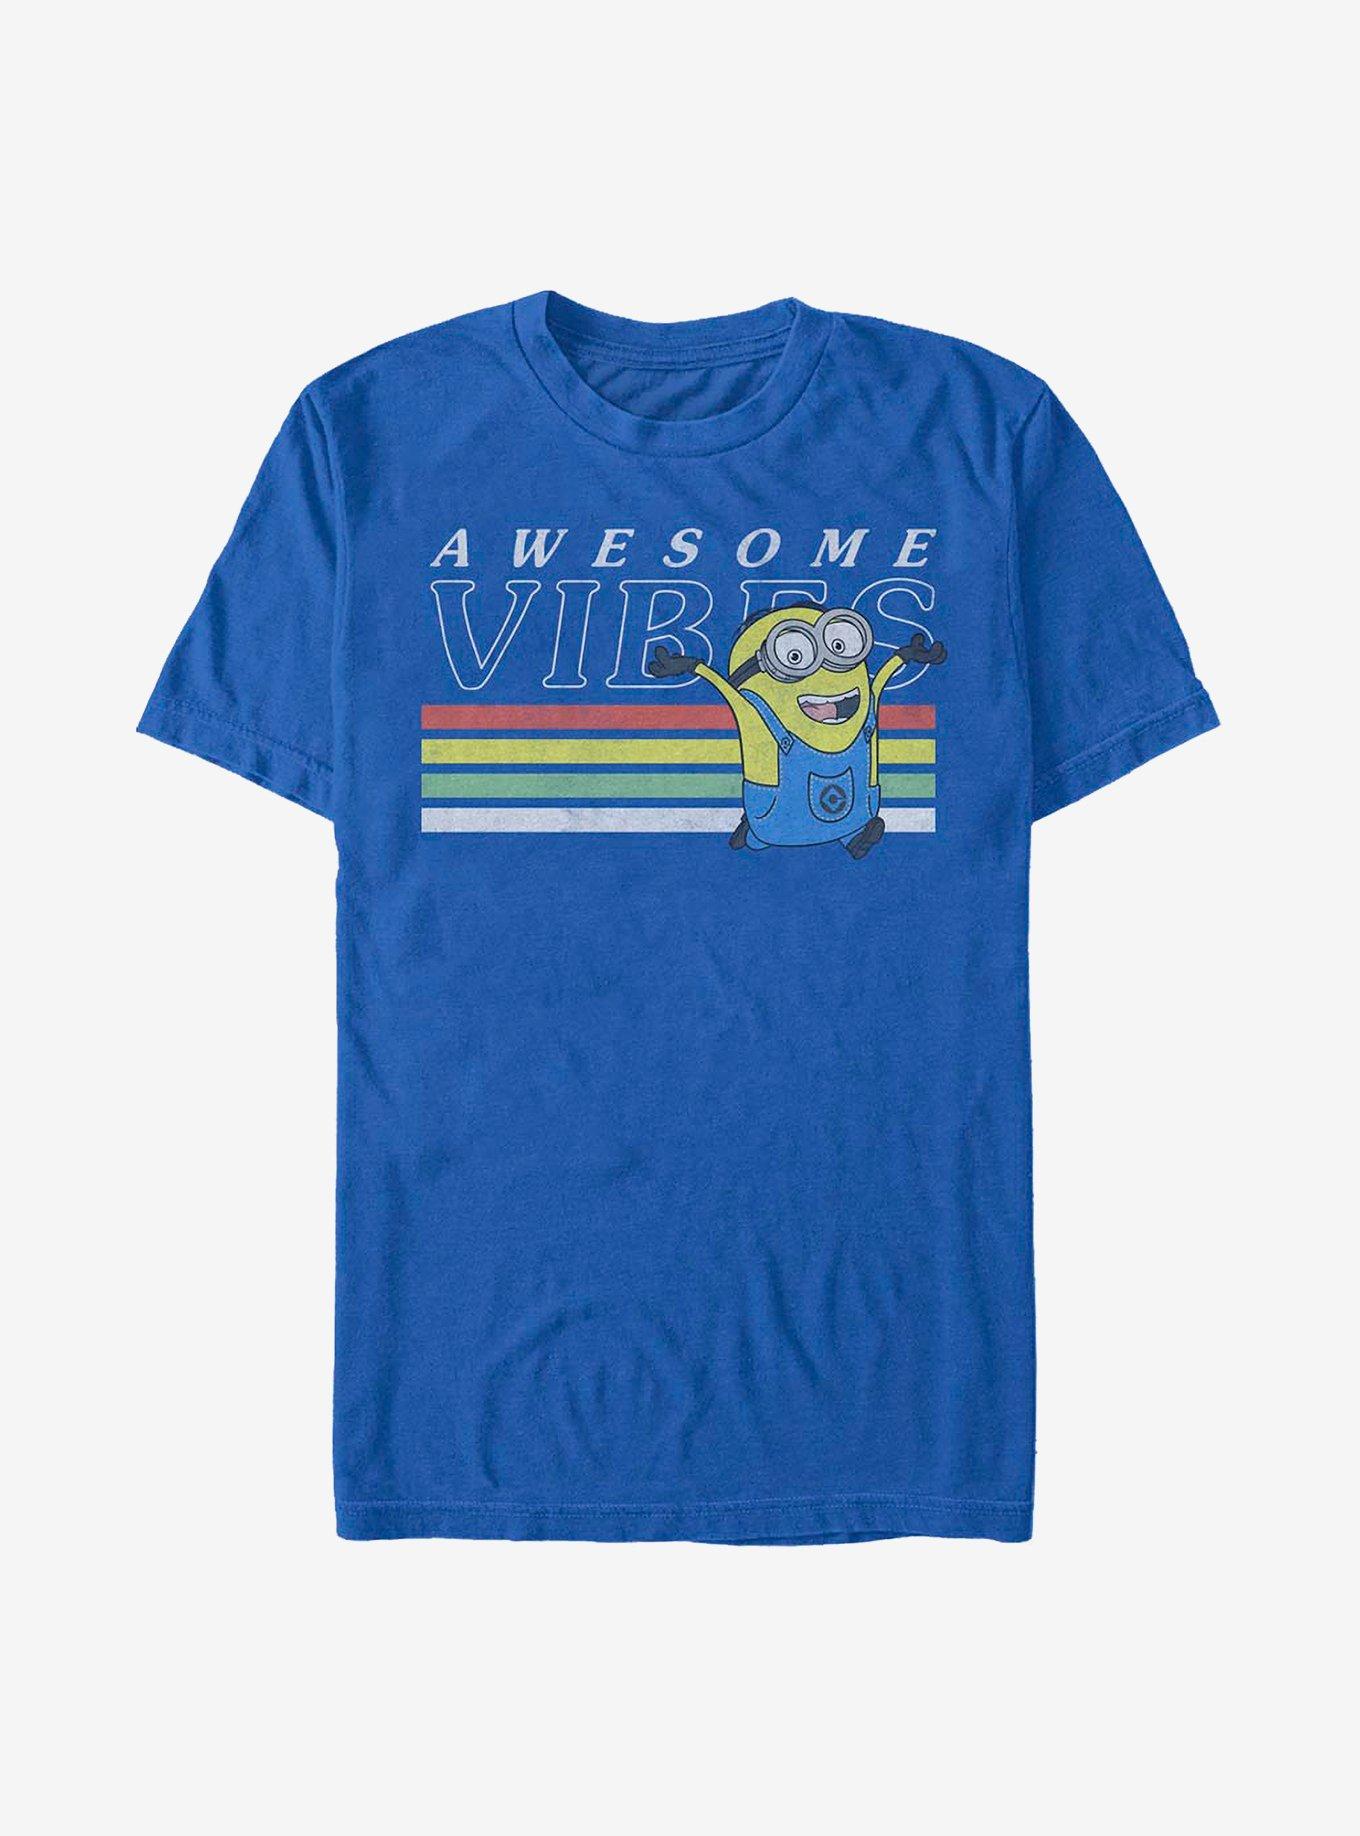 Minions Awesome Vibes T-Shirt